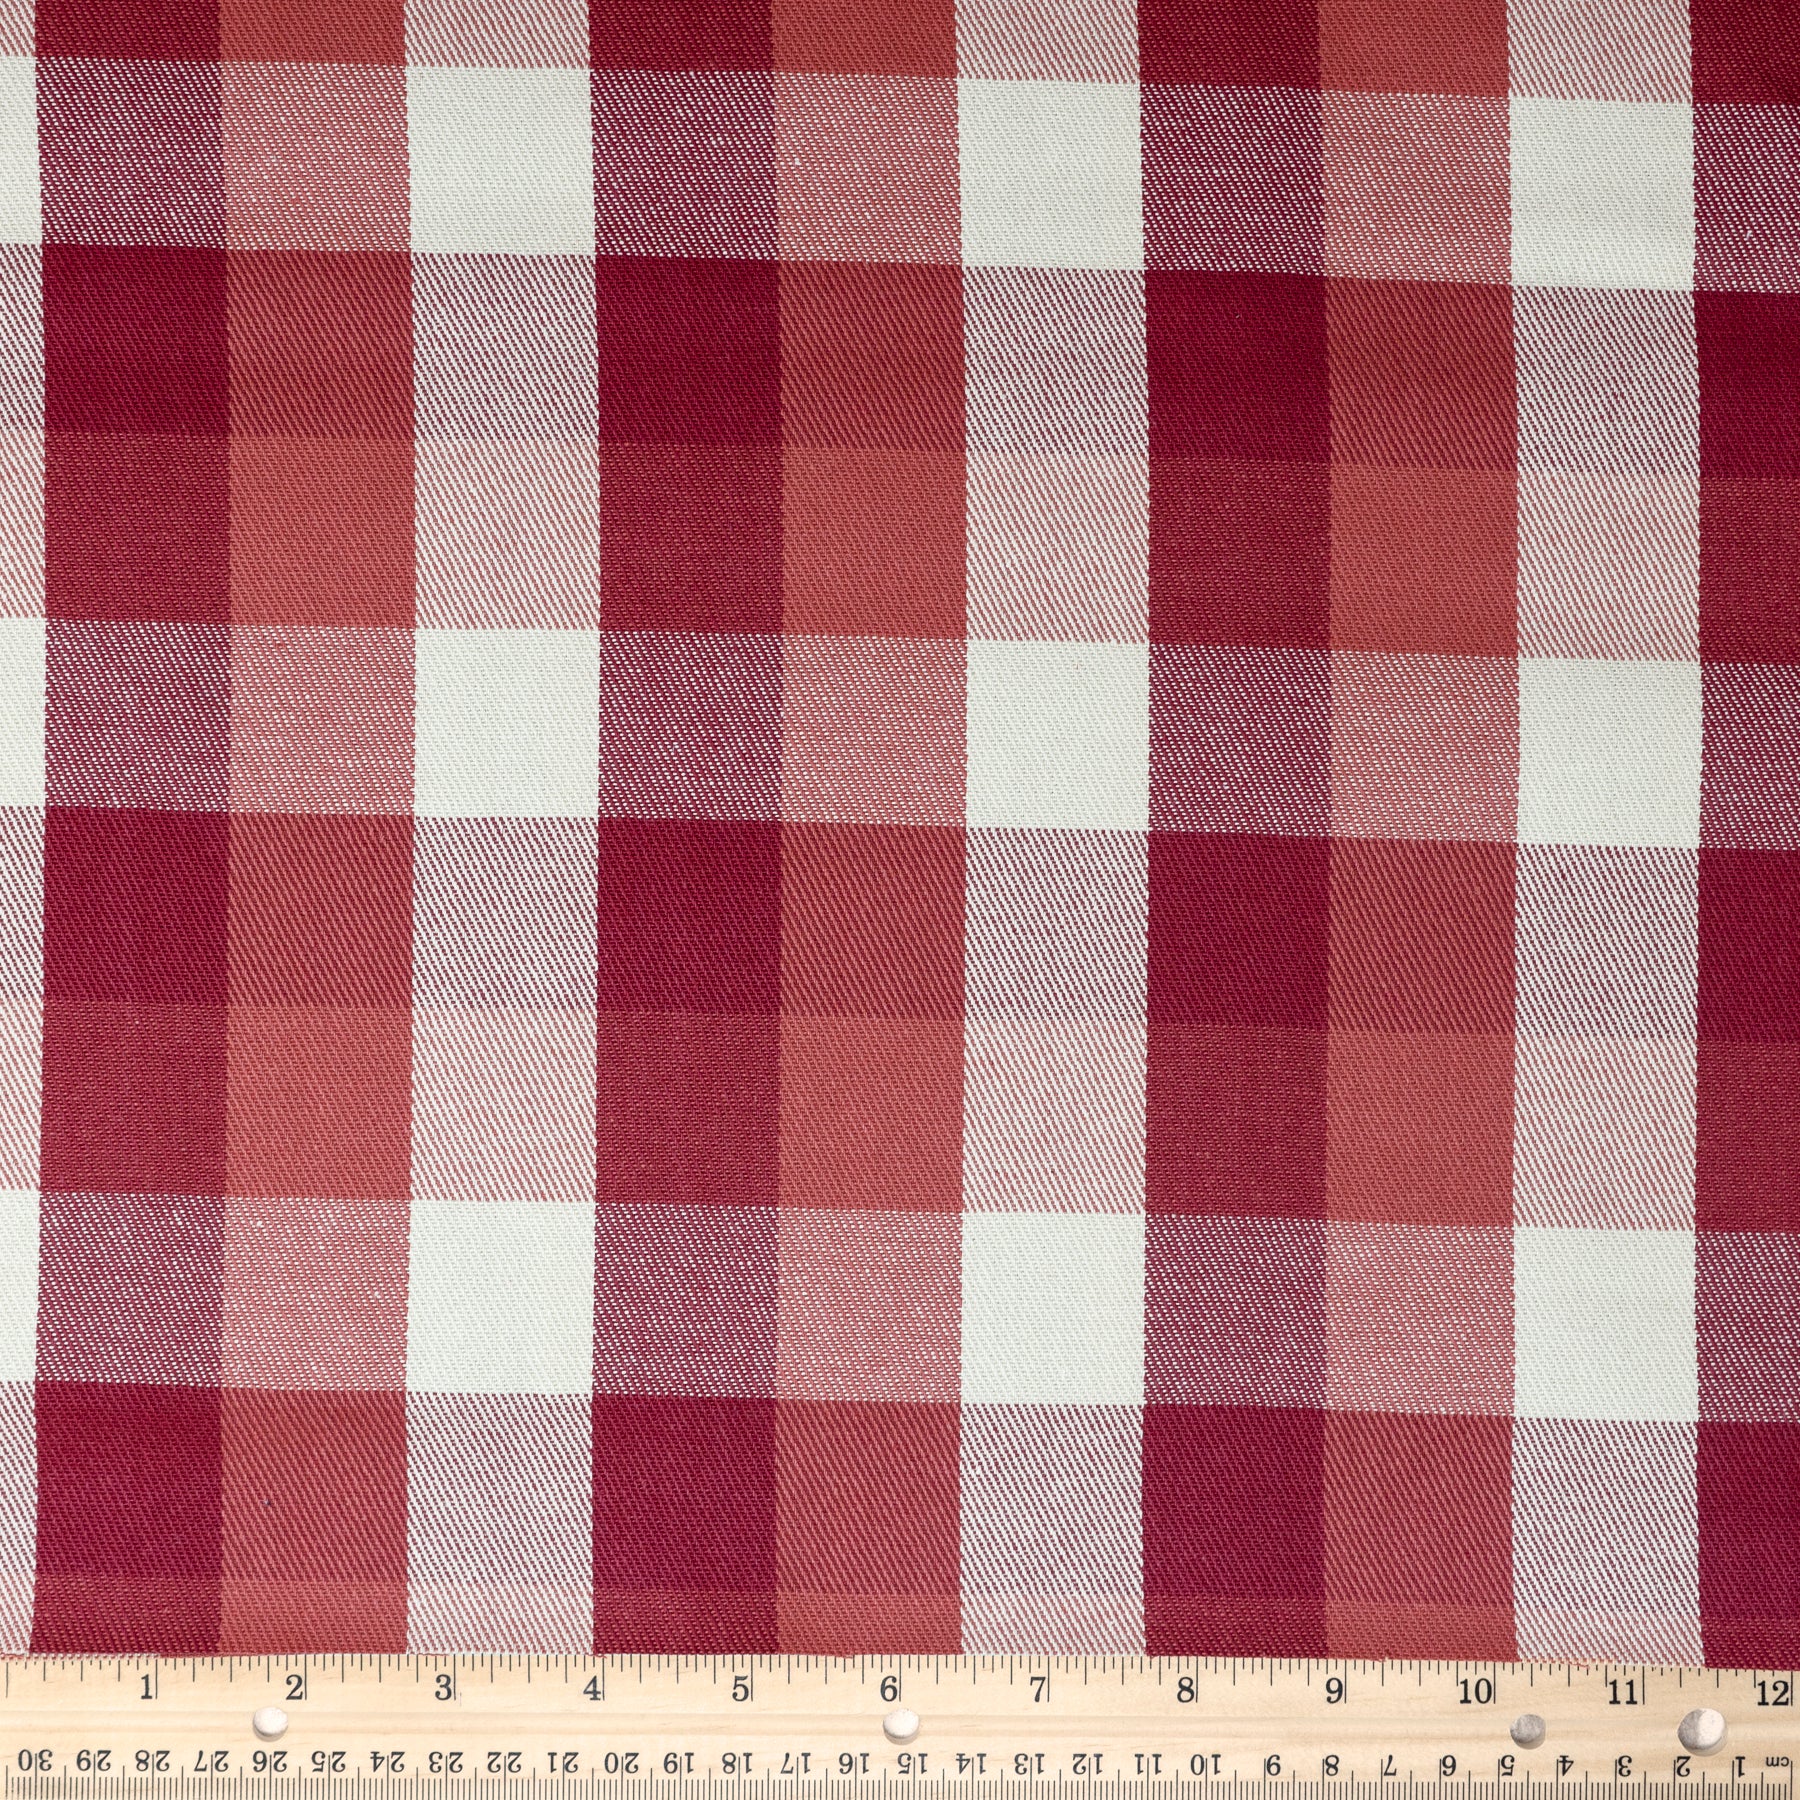 Waverly Inspirations 100% Cotton Duck 54" Twill Plaid Red Color Sewing Fabric by the Yard